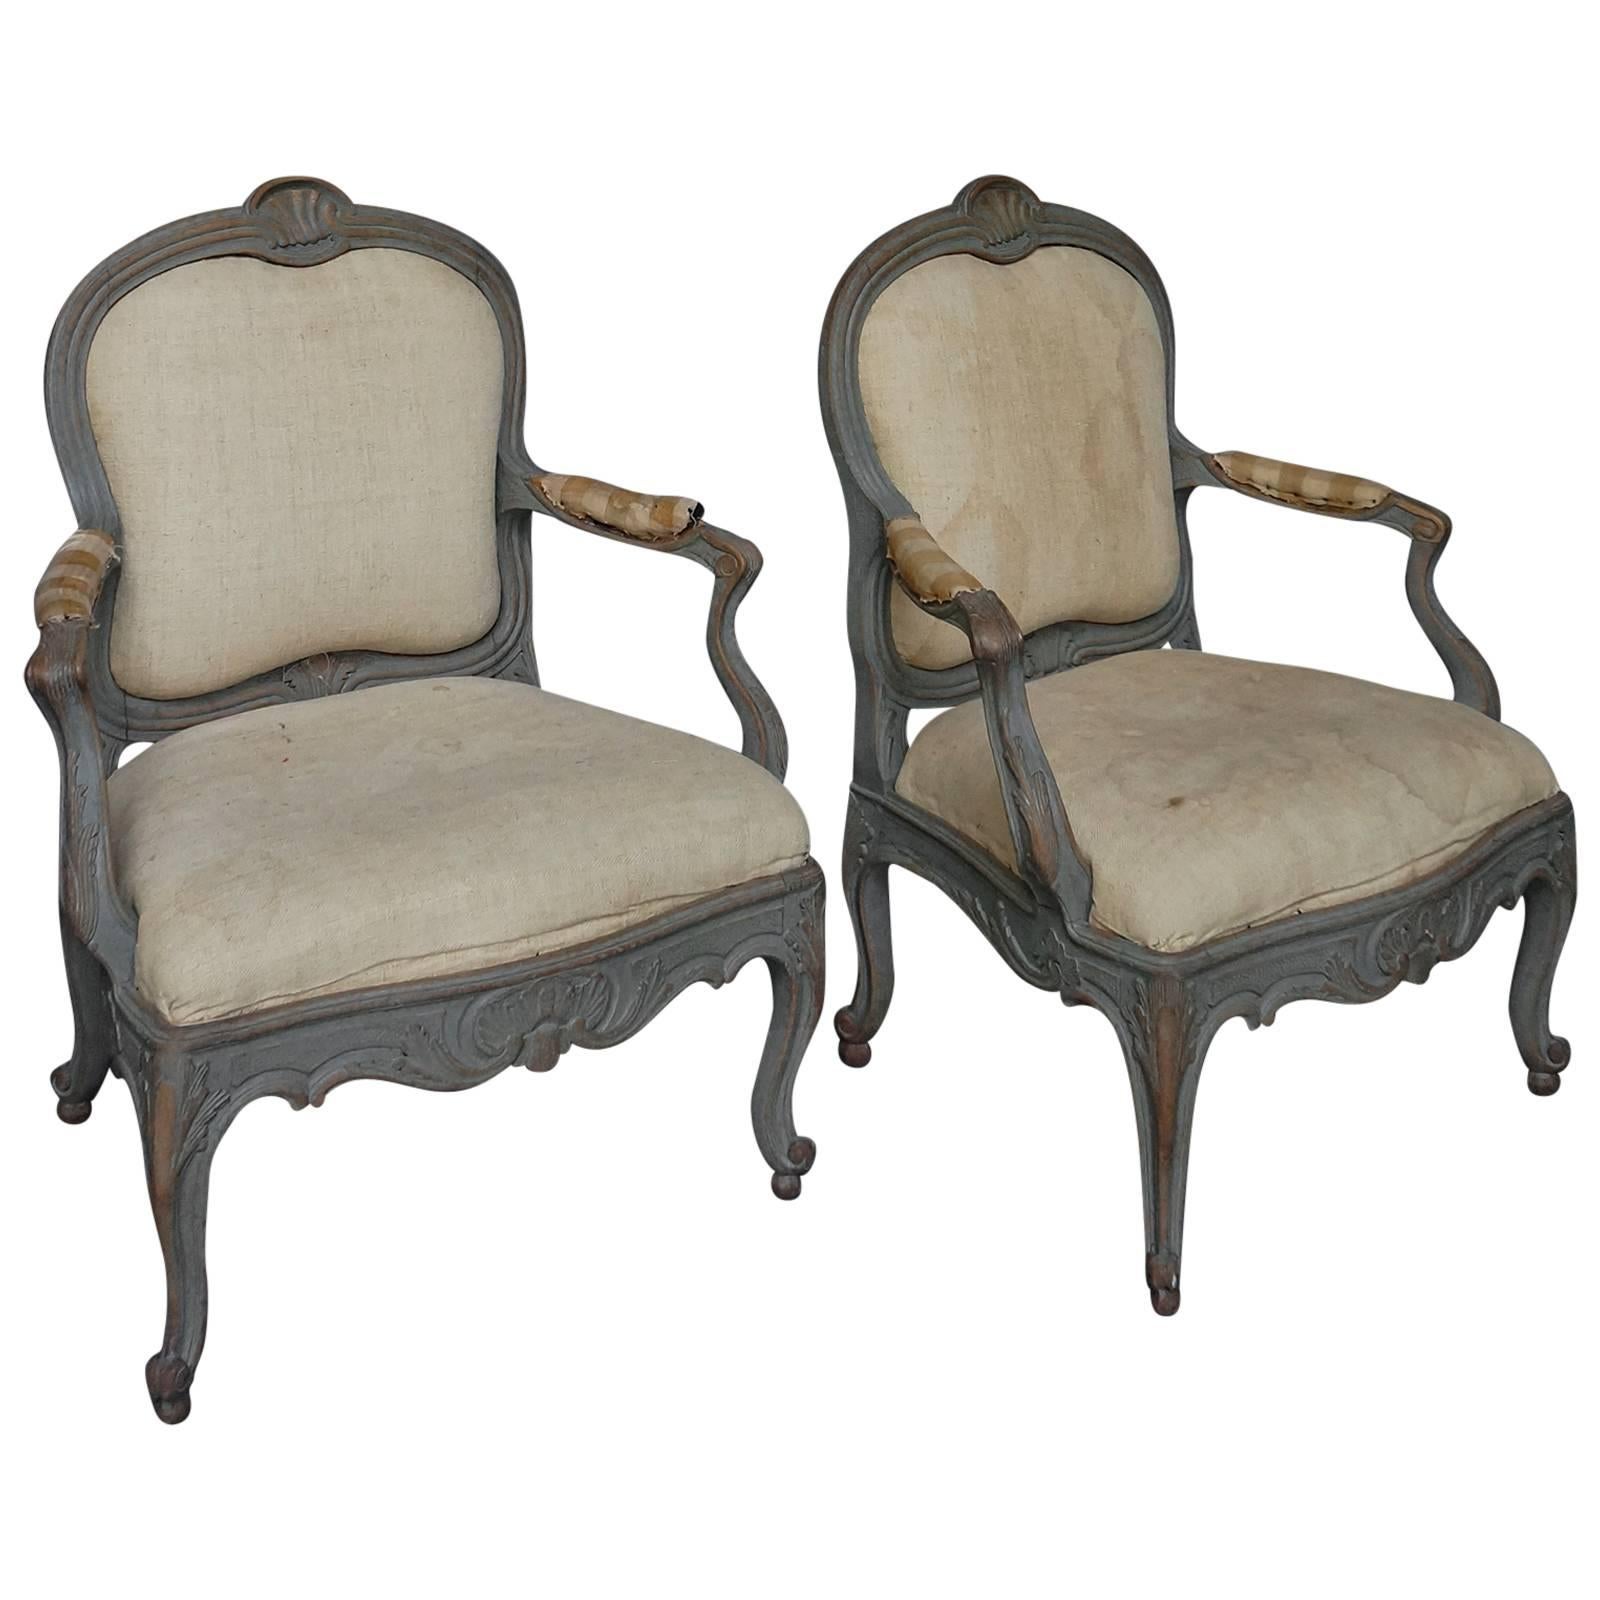 Pair of Swedish Armchairs from the Bibby Estate in Södermanland For Sale